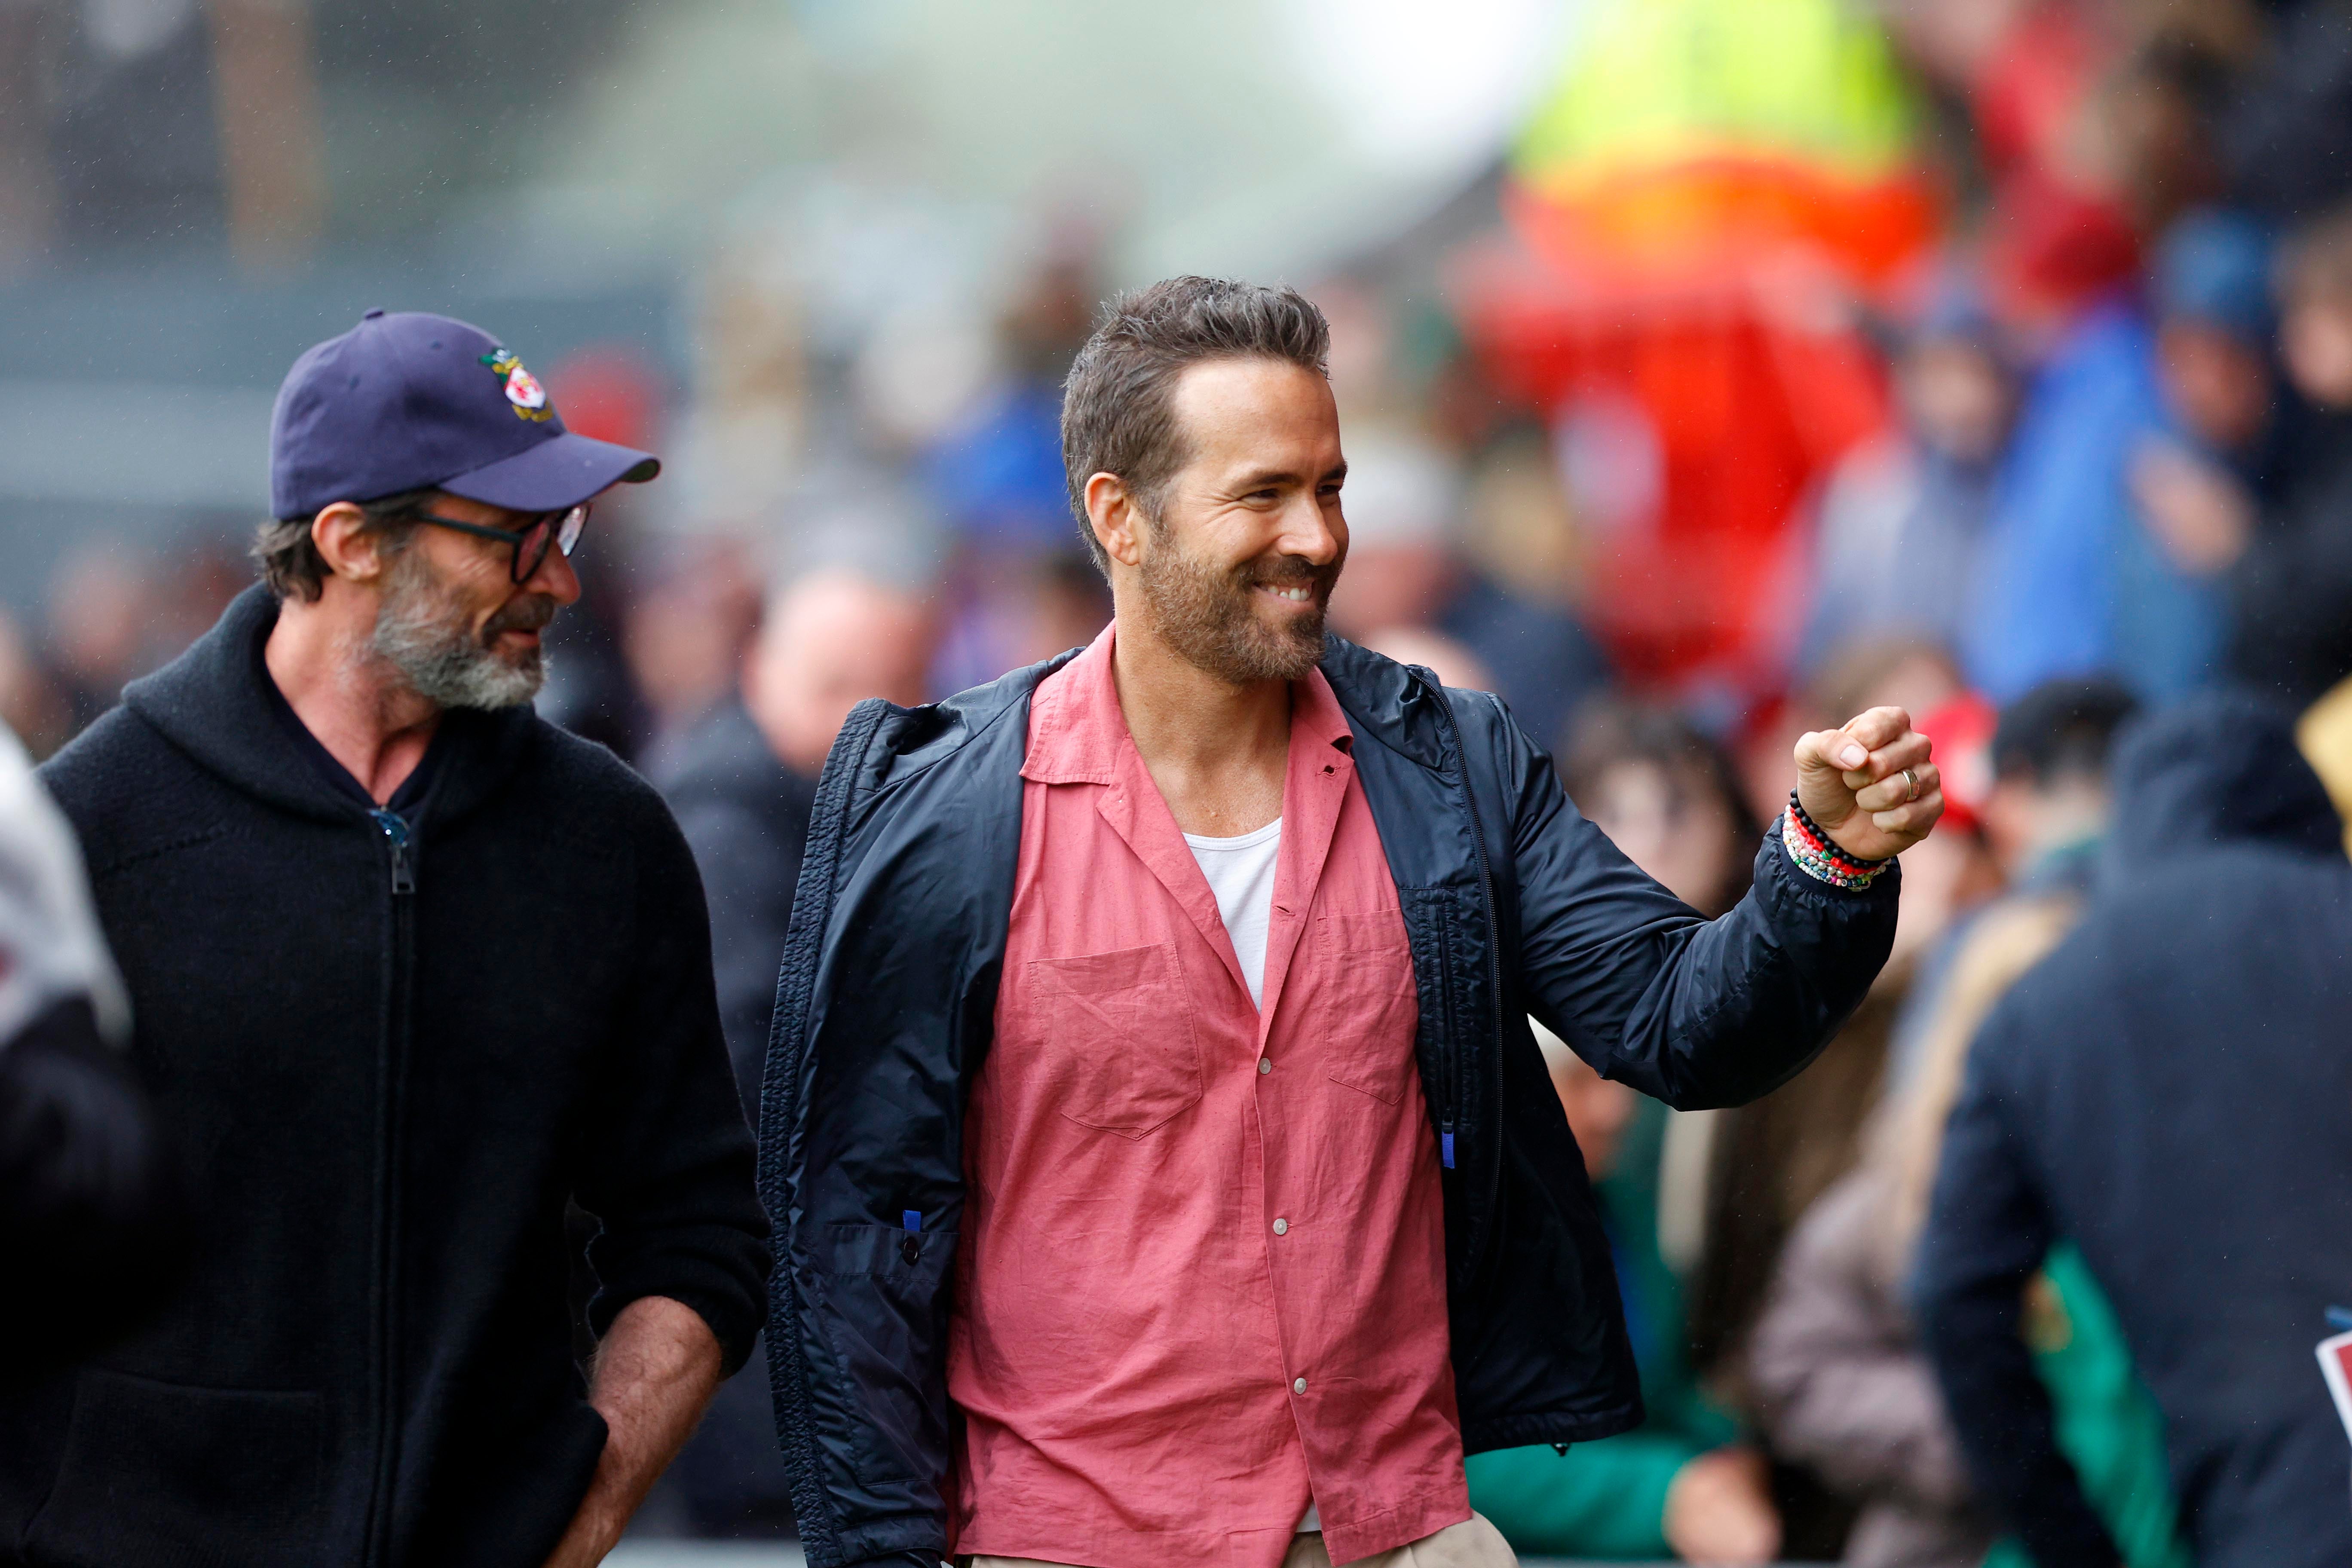 Ryan Reynolds and Hugh Jackman were in attendance for Wrexham’s first League Two game of the season